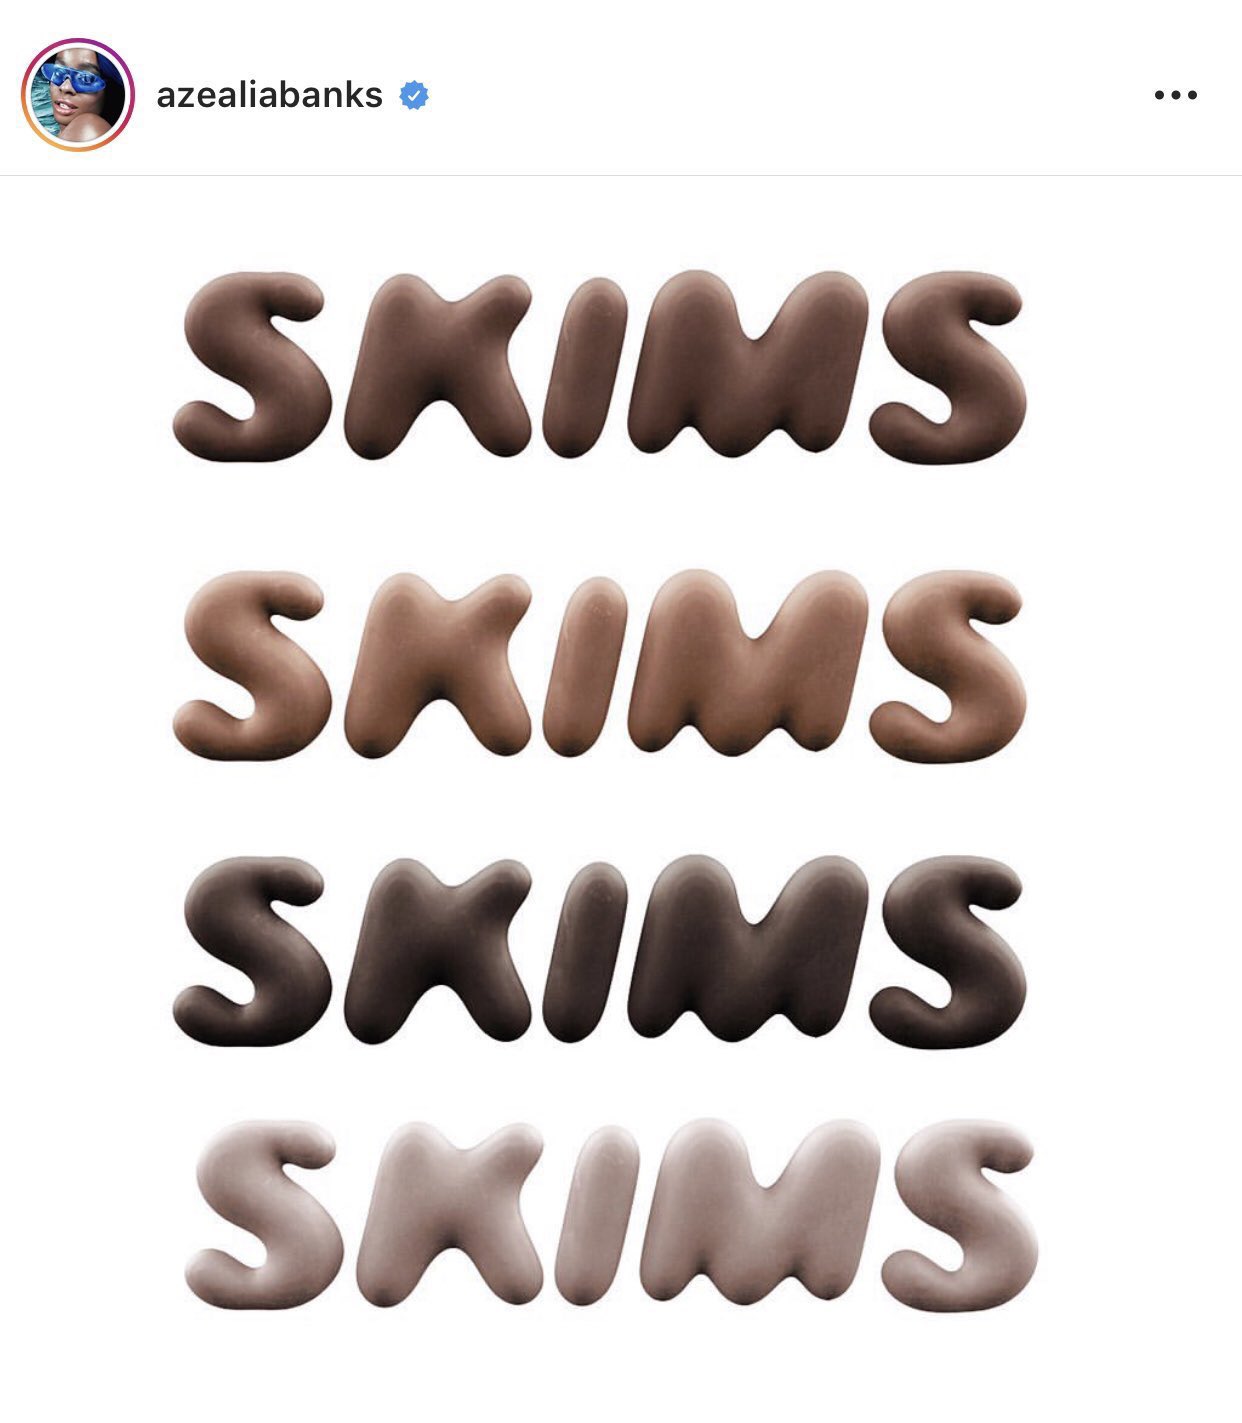 Azealia Banks News on X: DID YOU KNOW: ❓ Azealia Banks worked on the  original Skims logo for Kanye West & Kim Kardashian - however received no  credit after her design wasn't